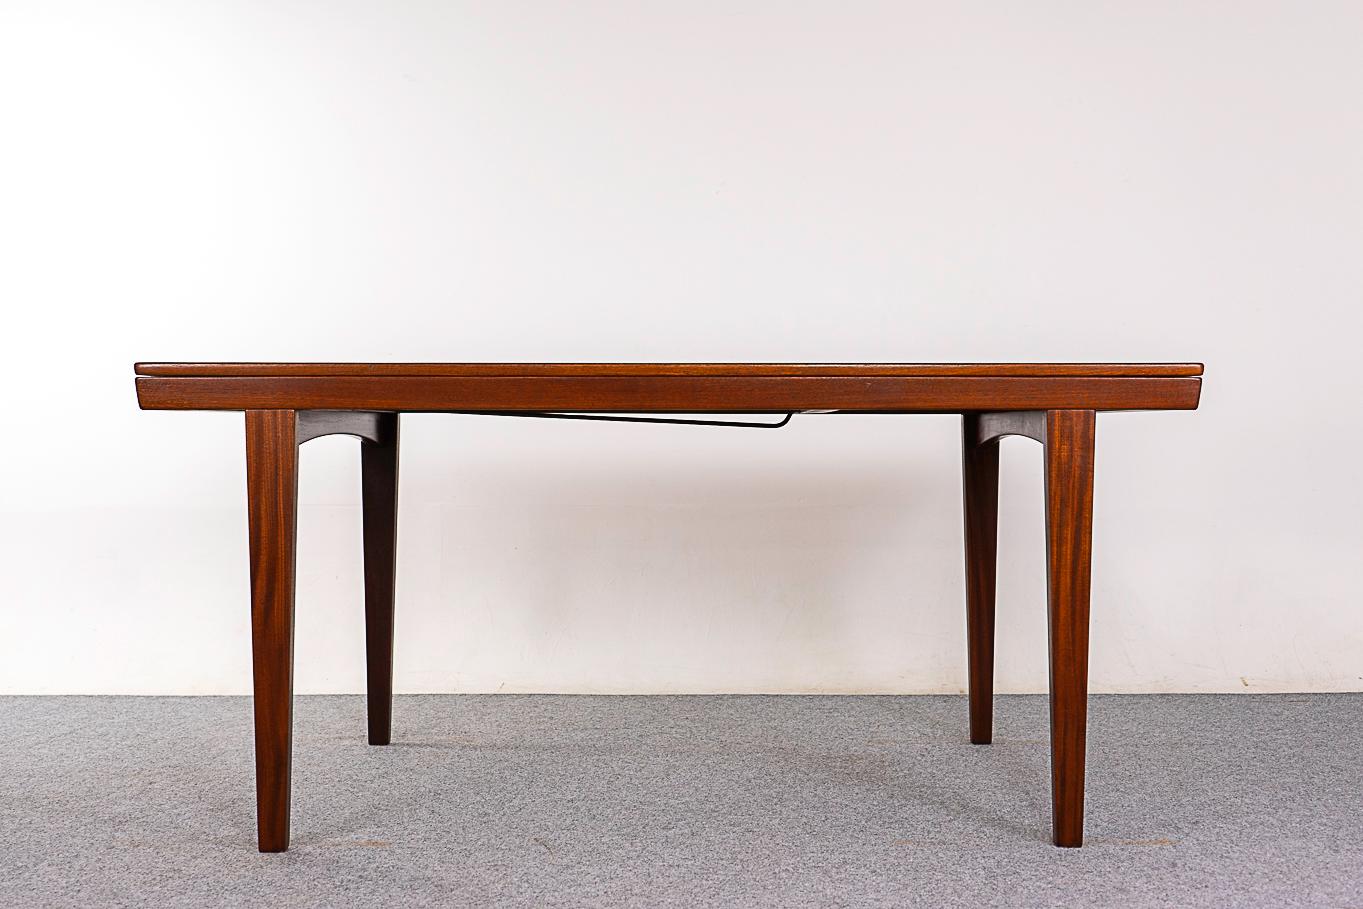 Teak Danish dining table, circa 1960's. Top is framed with solid wood trim, center panels feature highly figured book-matched grain veneer. Unique design, table top slides open to access the self storing leaf. Danish Furniture Makers' Control stamp